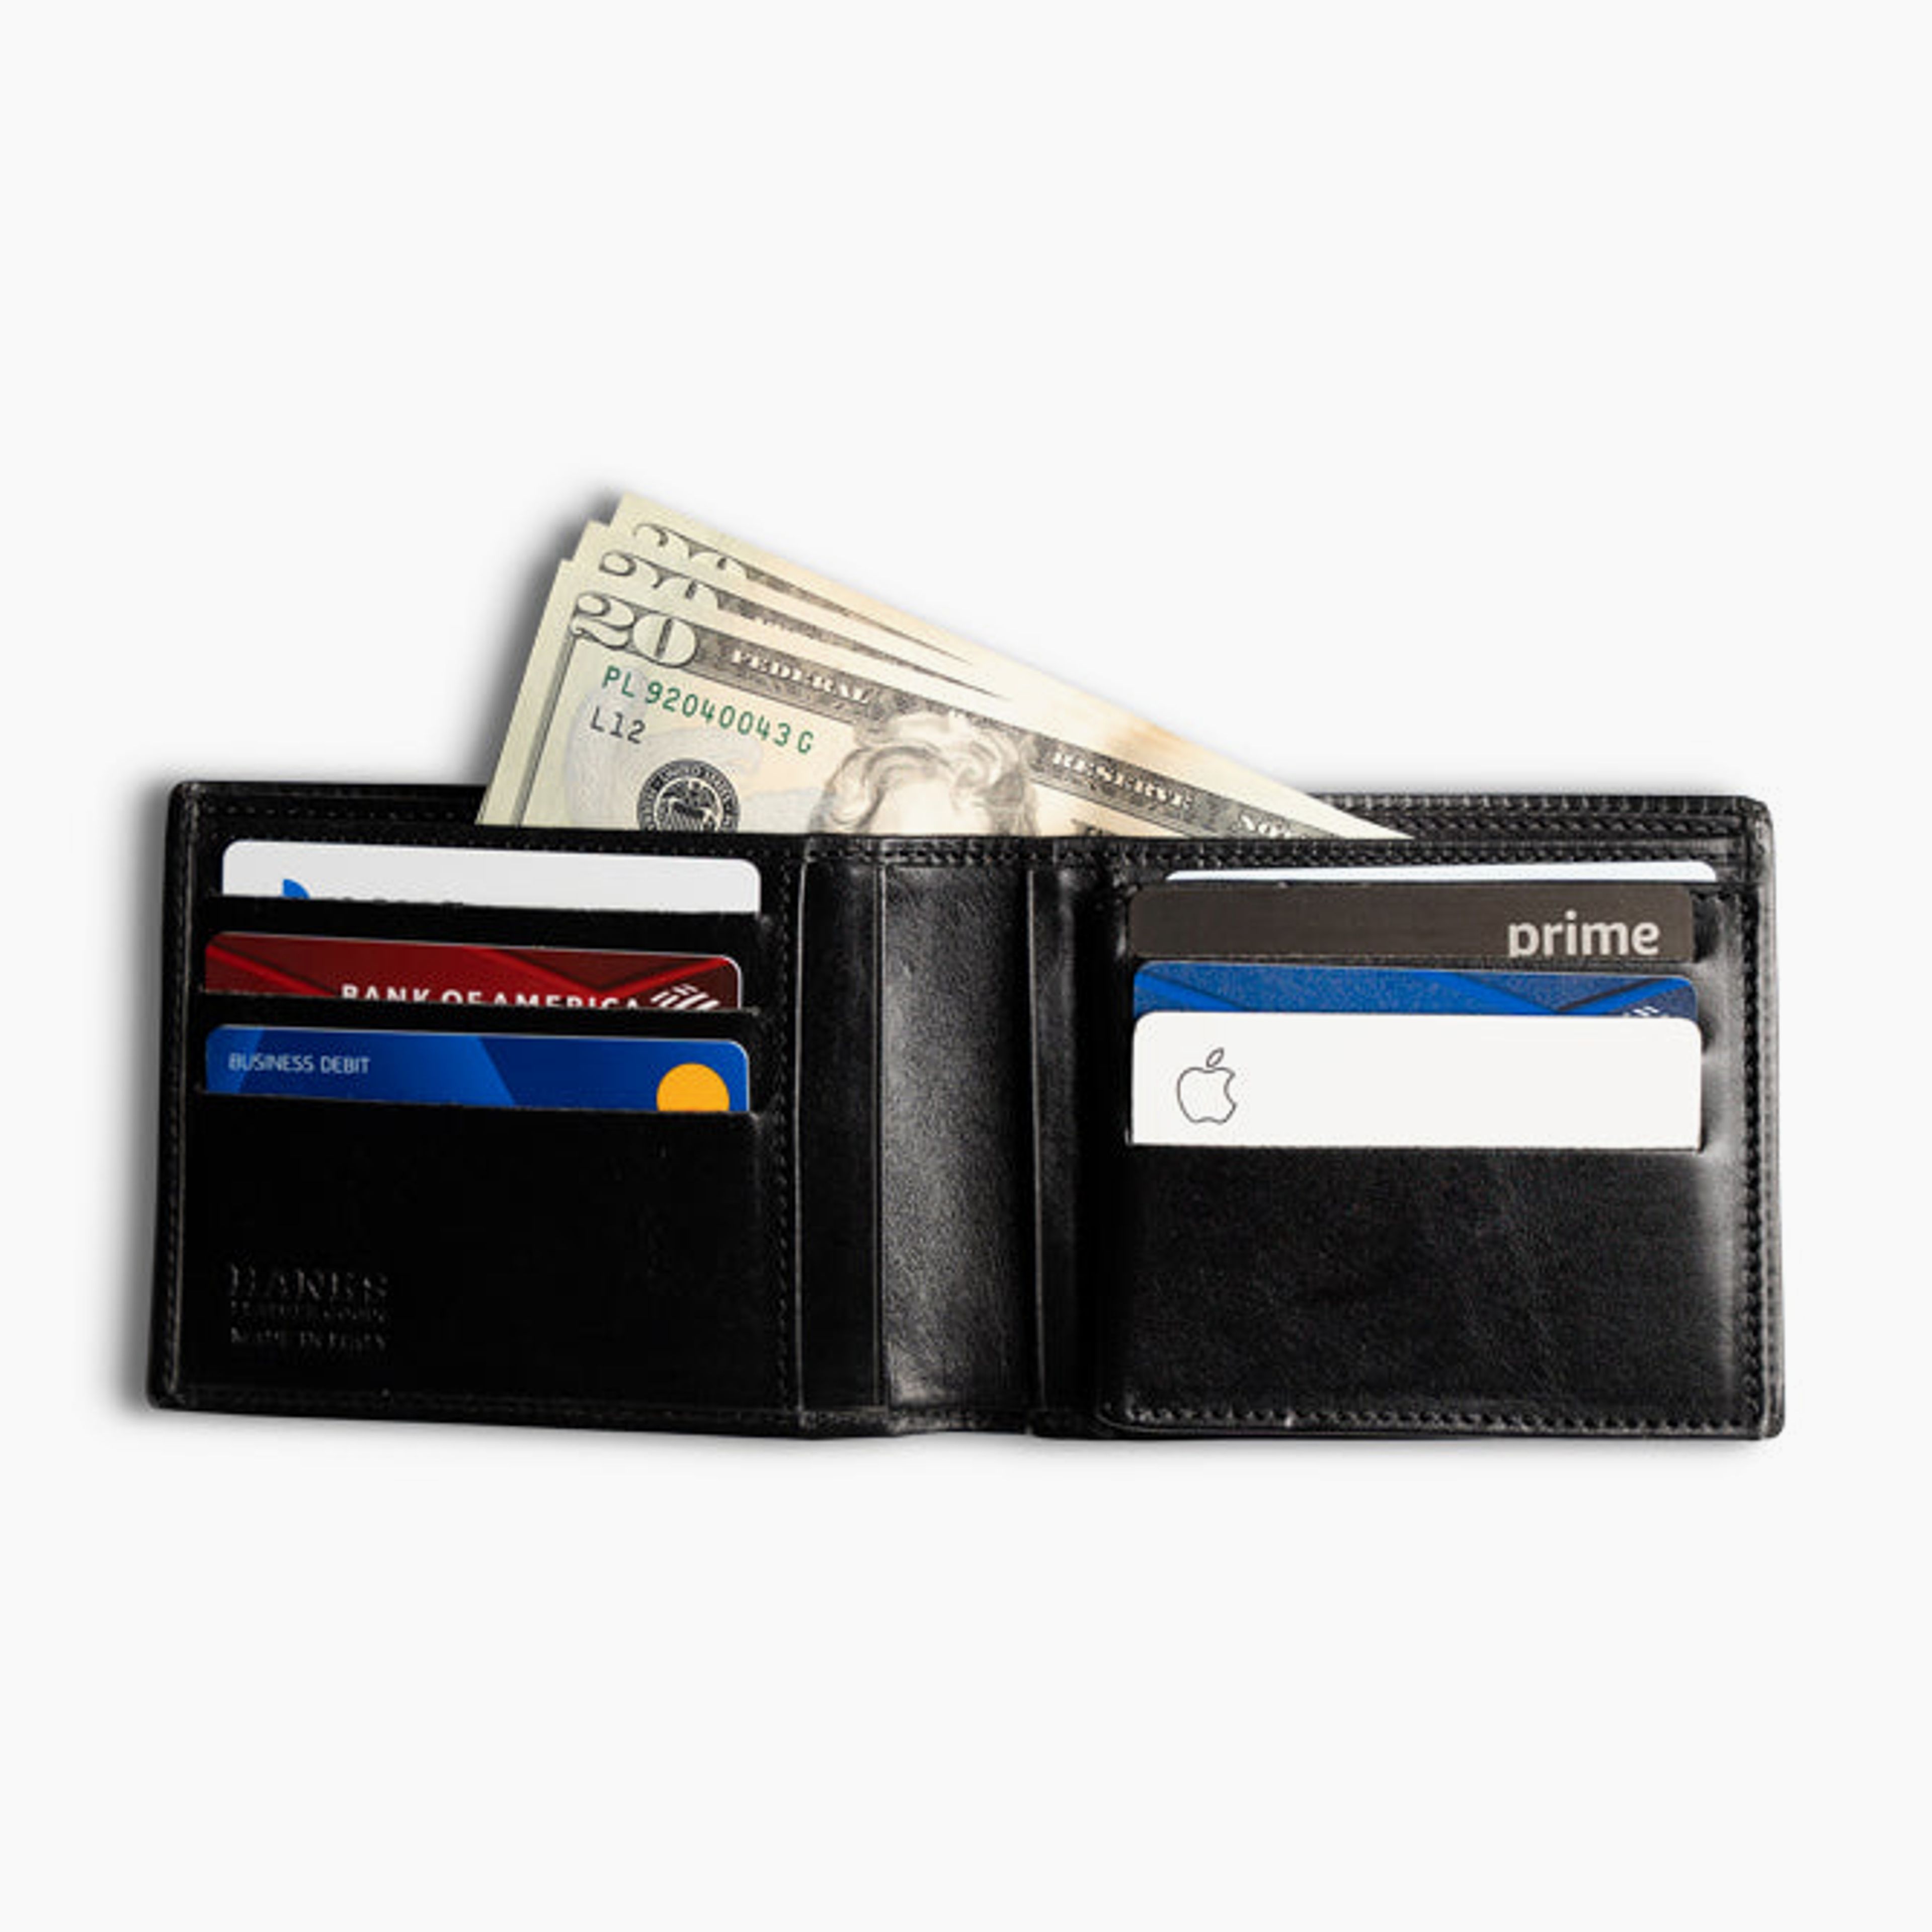 Two Fold Wallet with ID Window